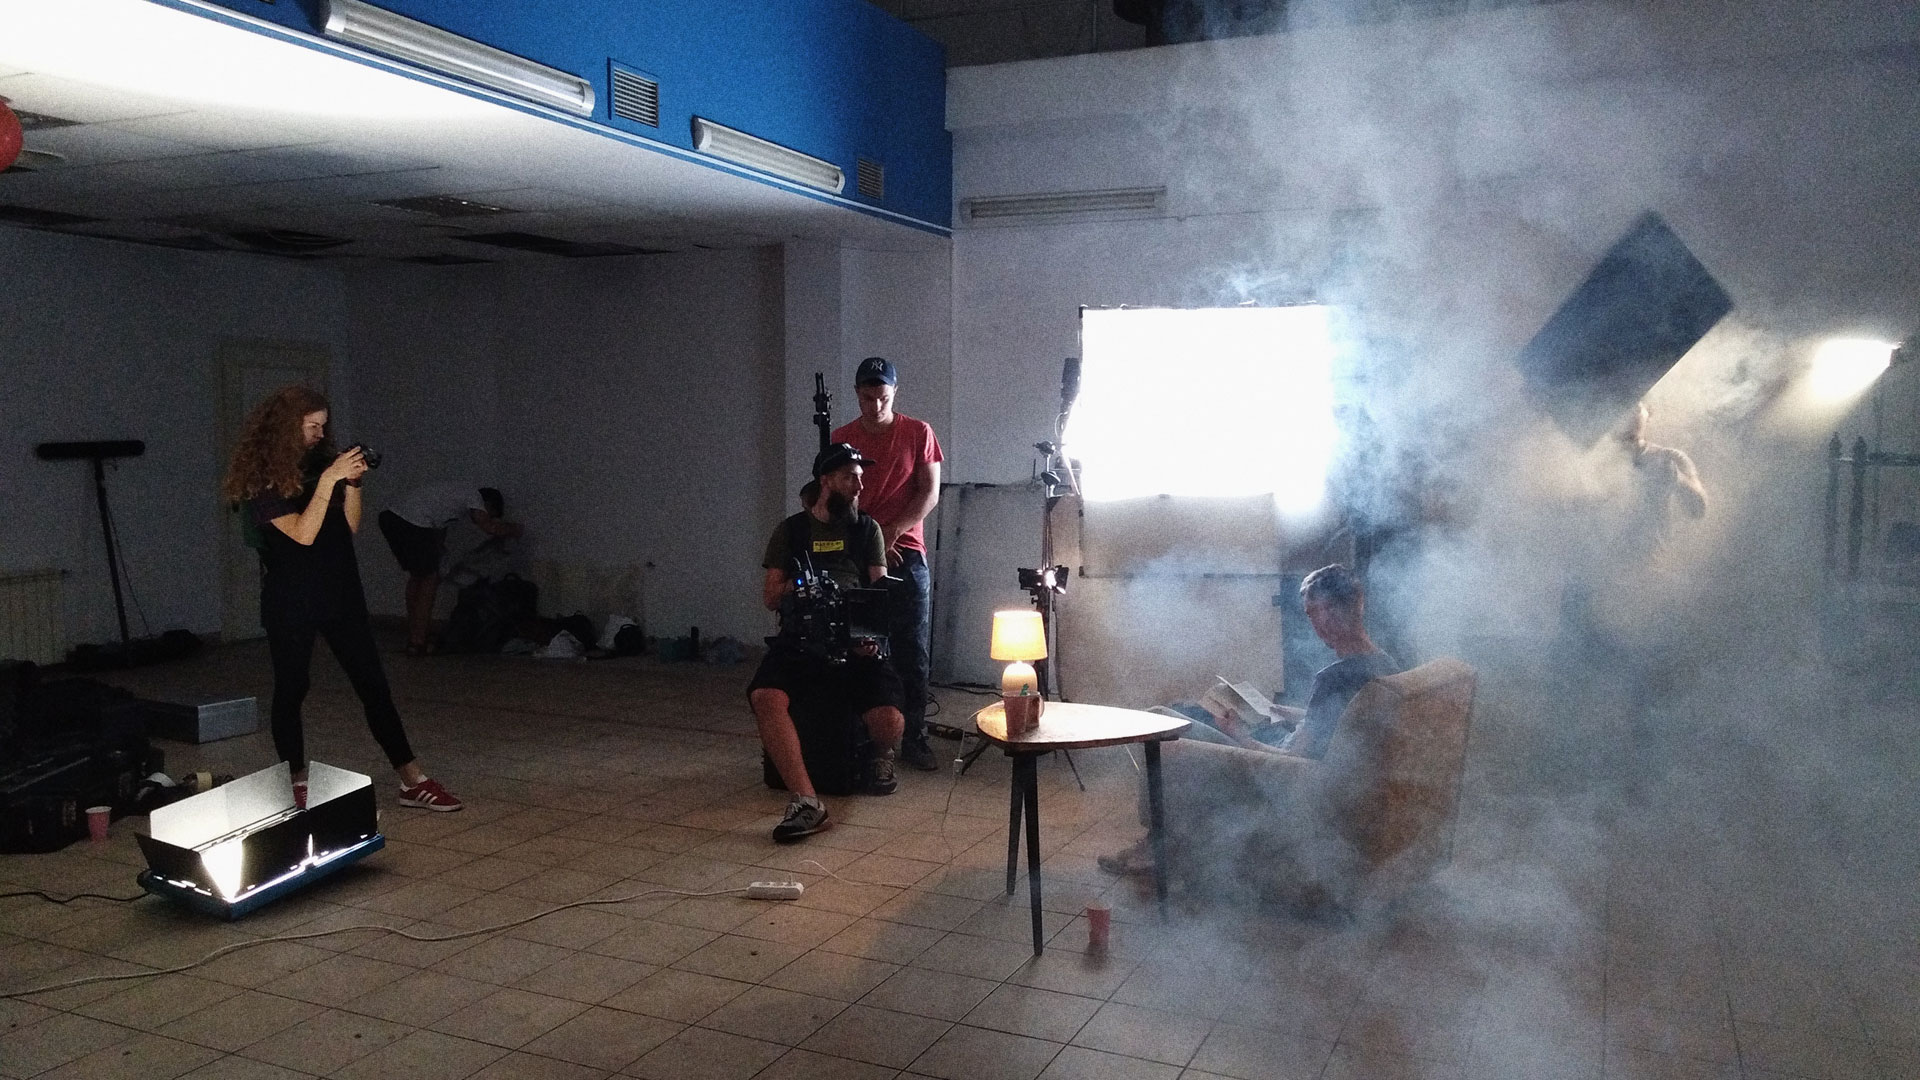 To add depth to the scene, we used a smoke machine. We went a bit overboard the first time and had to disperse the excess smoke.